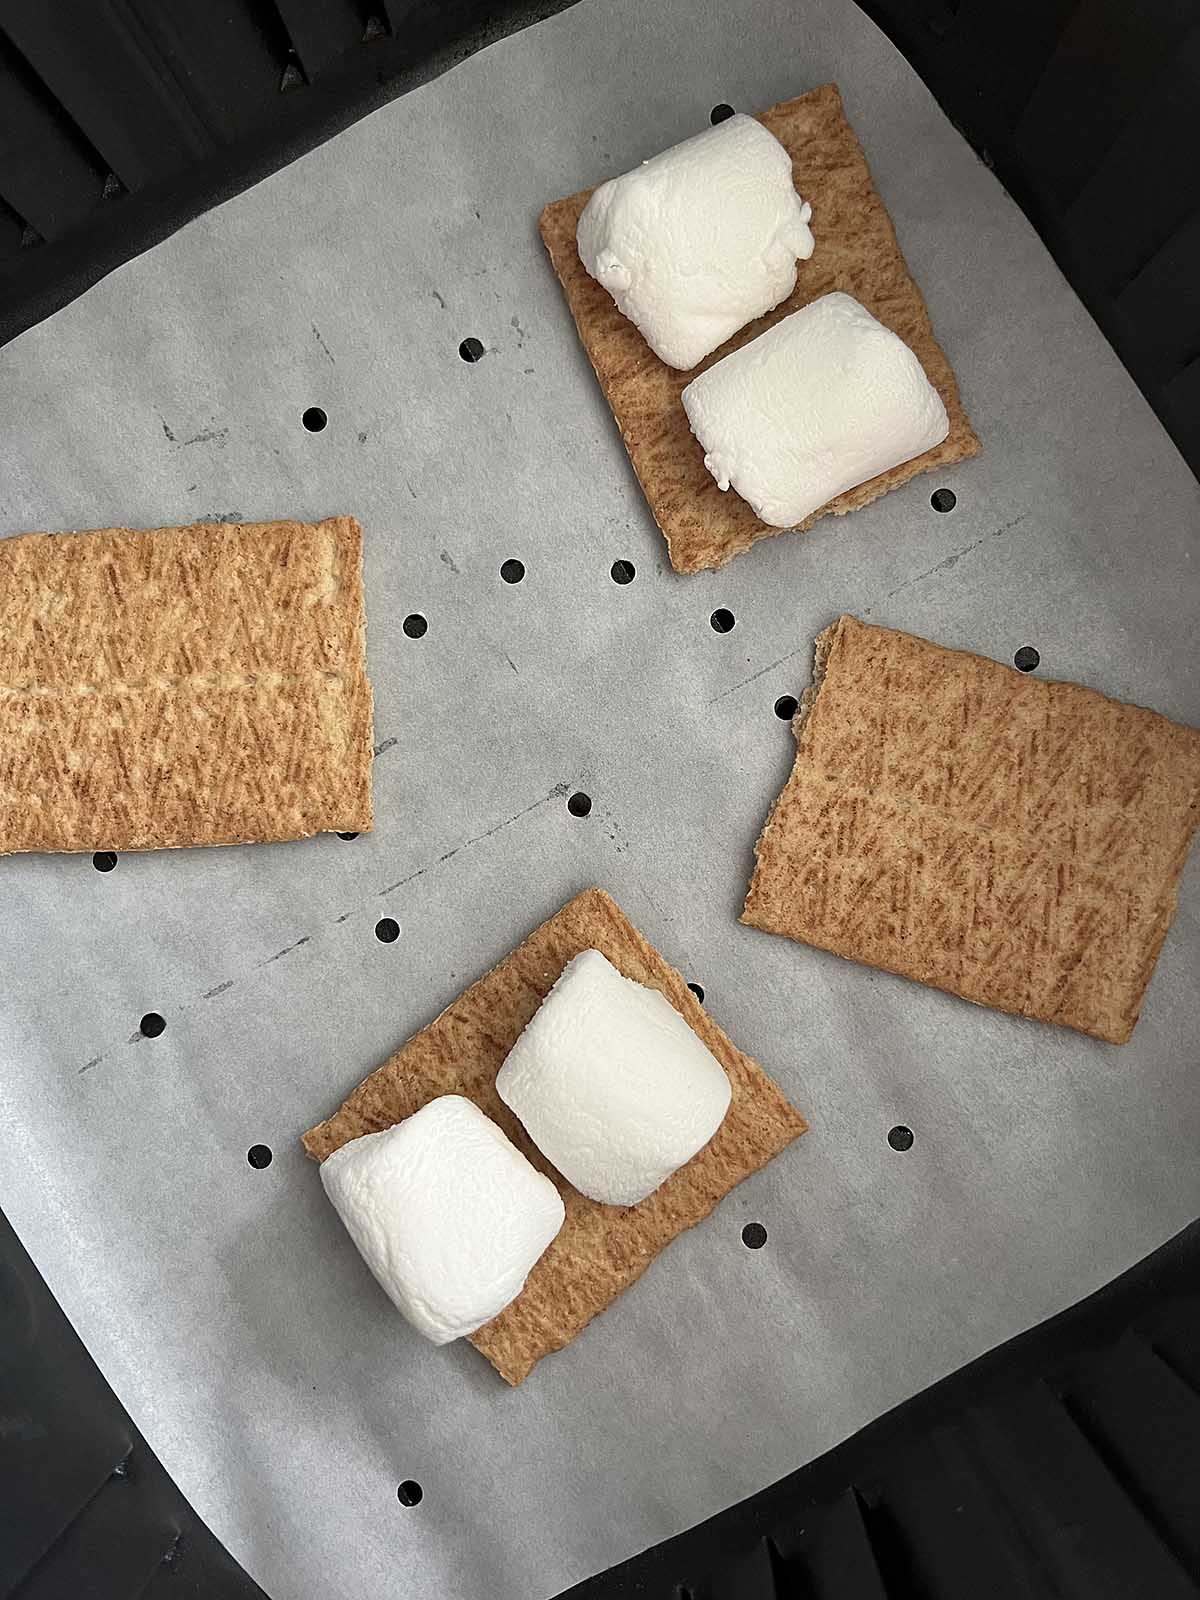 Marshmallows on graham crackers in an air fryer basket.